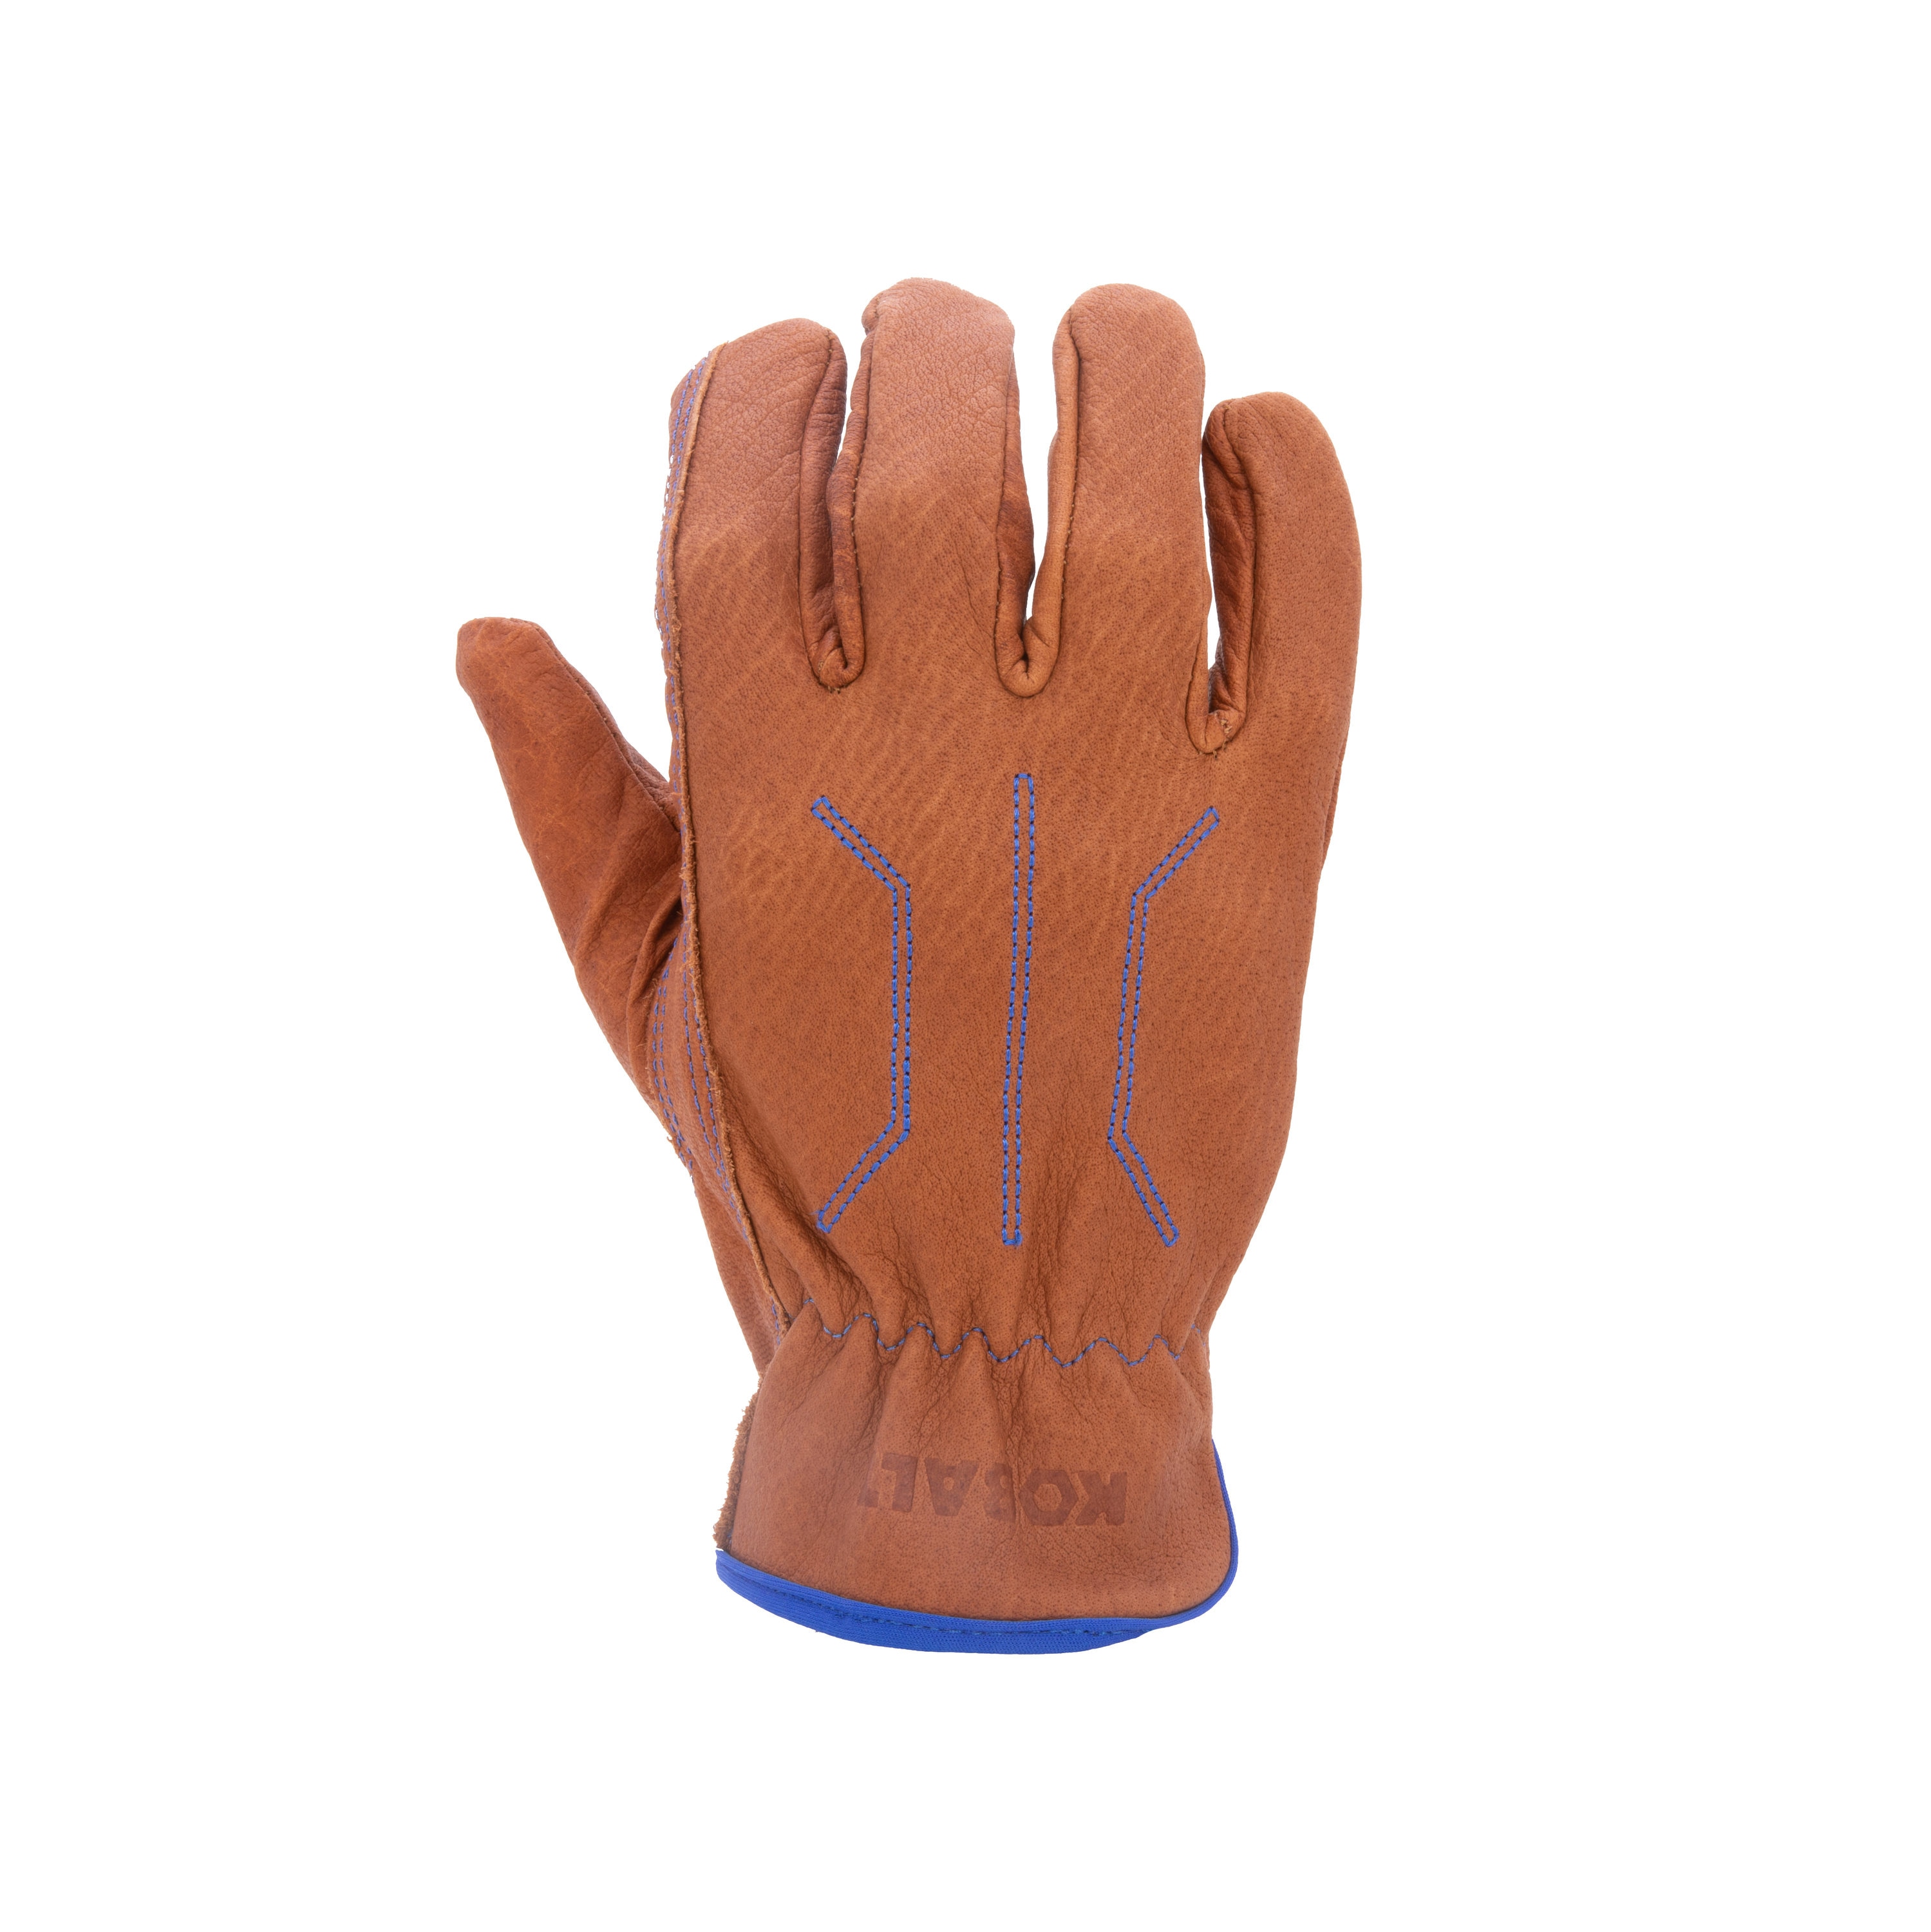 1Pair Red Working Glove For Women And Men Slip-Proof Oil